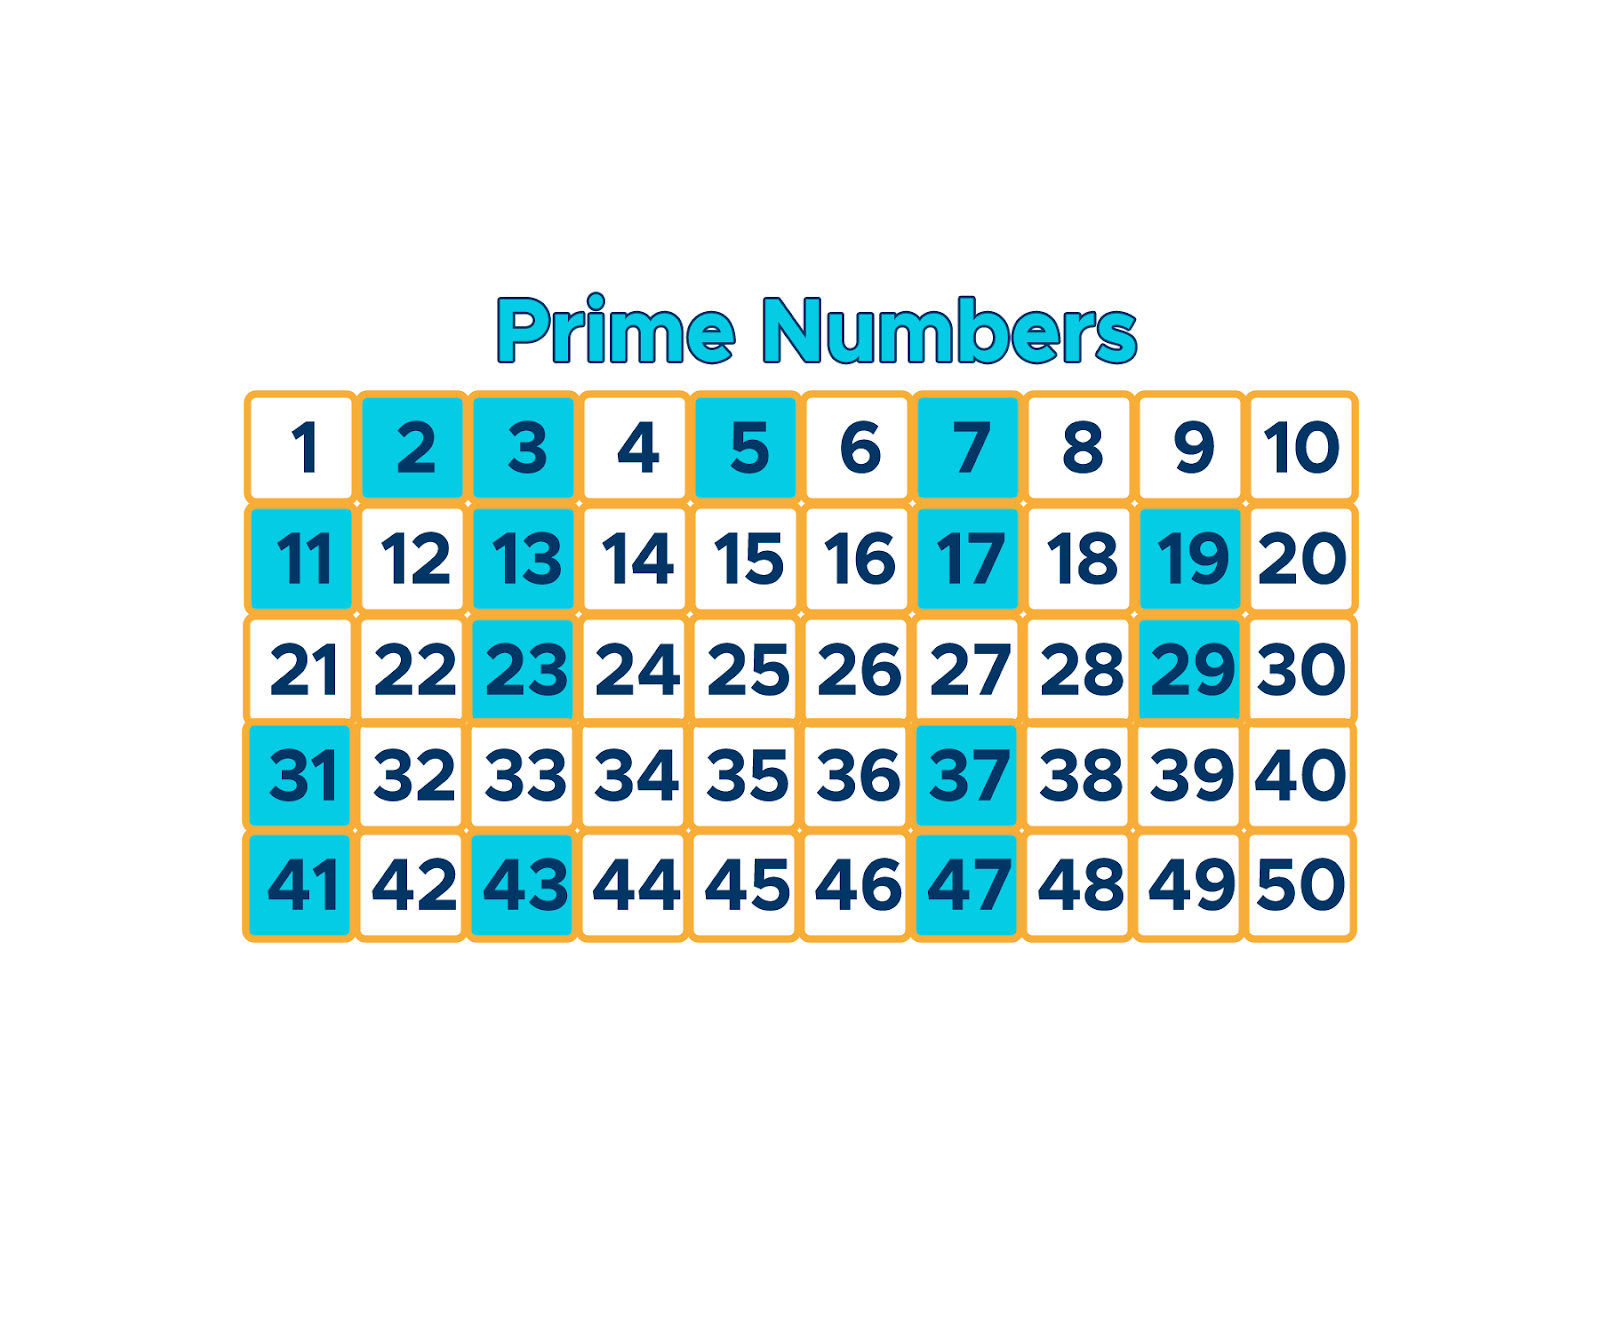 Factors of 18  How to Find the Prime Factors of 18 by Prime Factorization  Method?